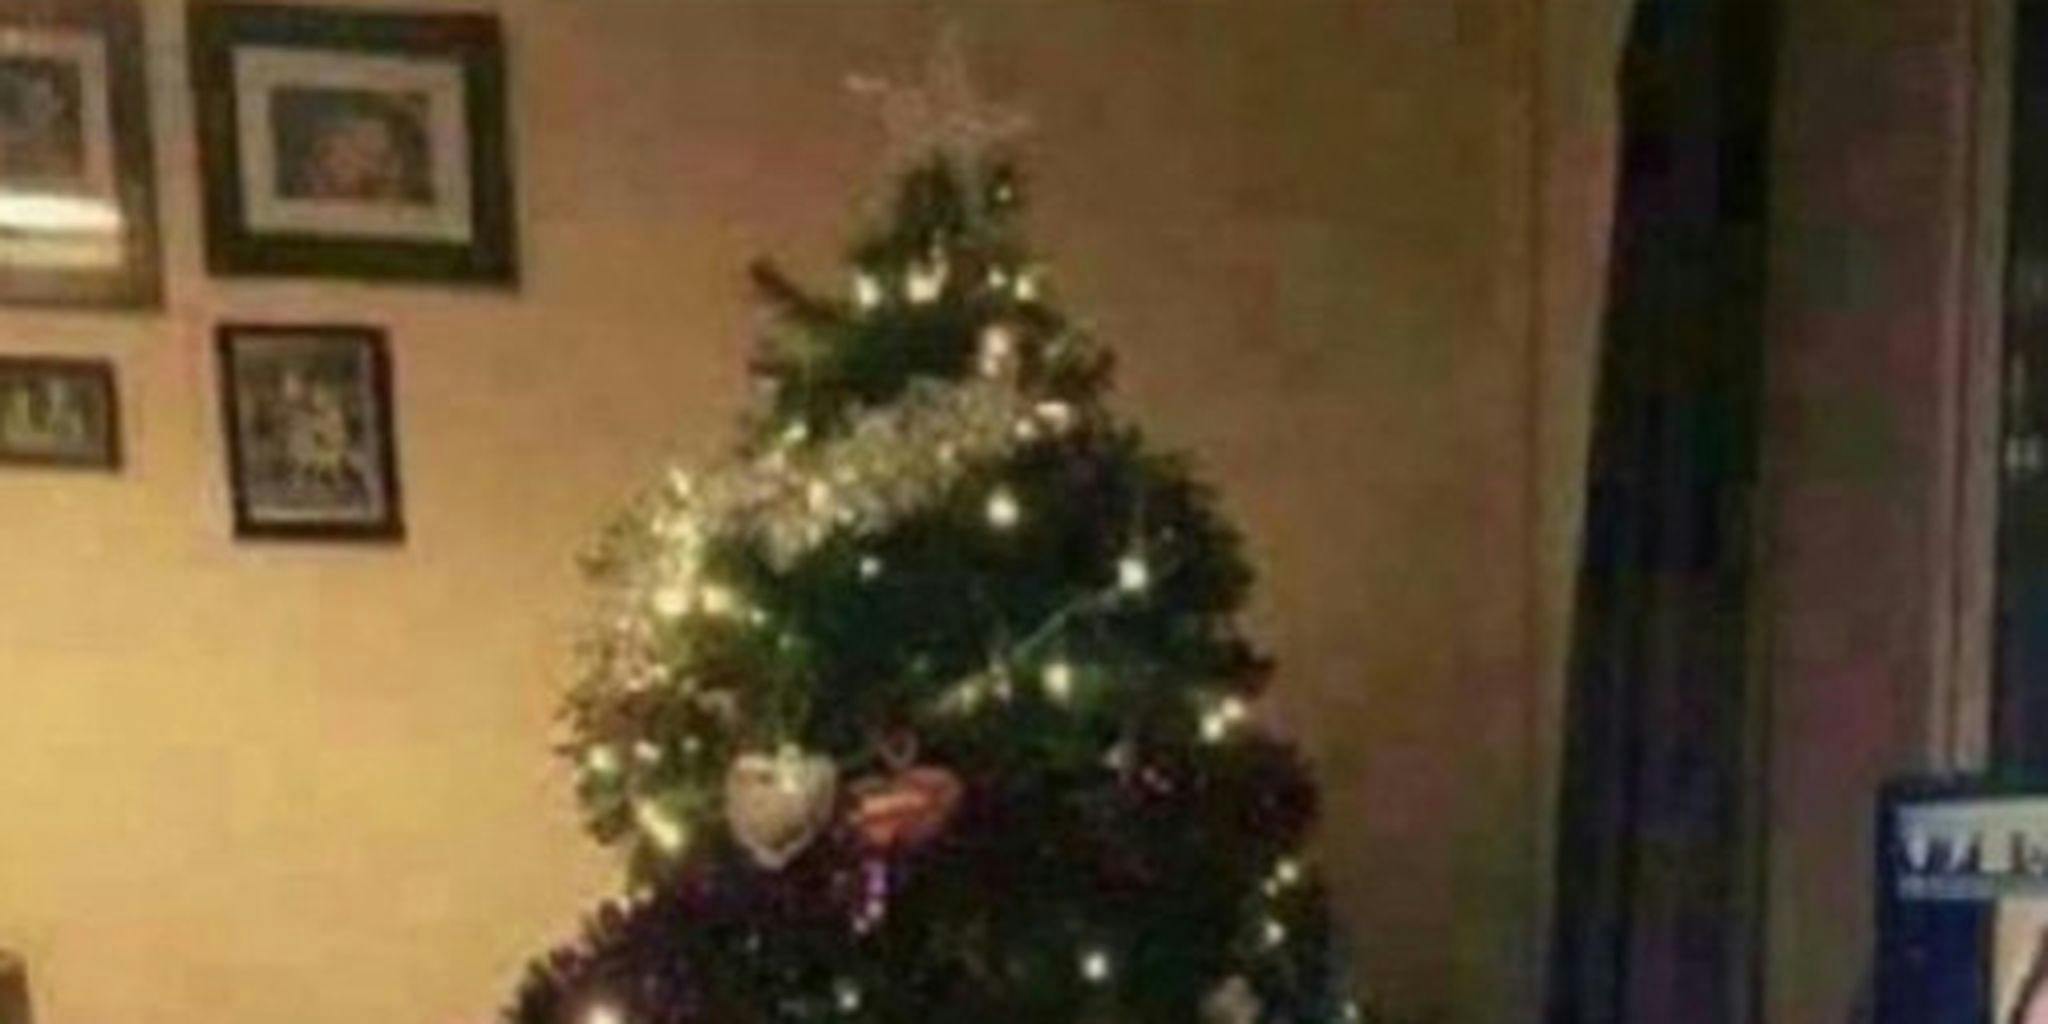 Former WWE star posts Christmas tree photo, fails to crop out the porn he was watching